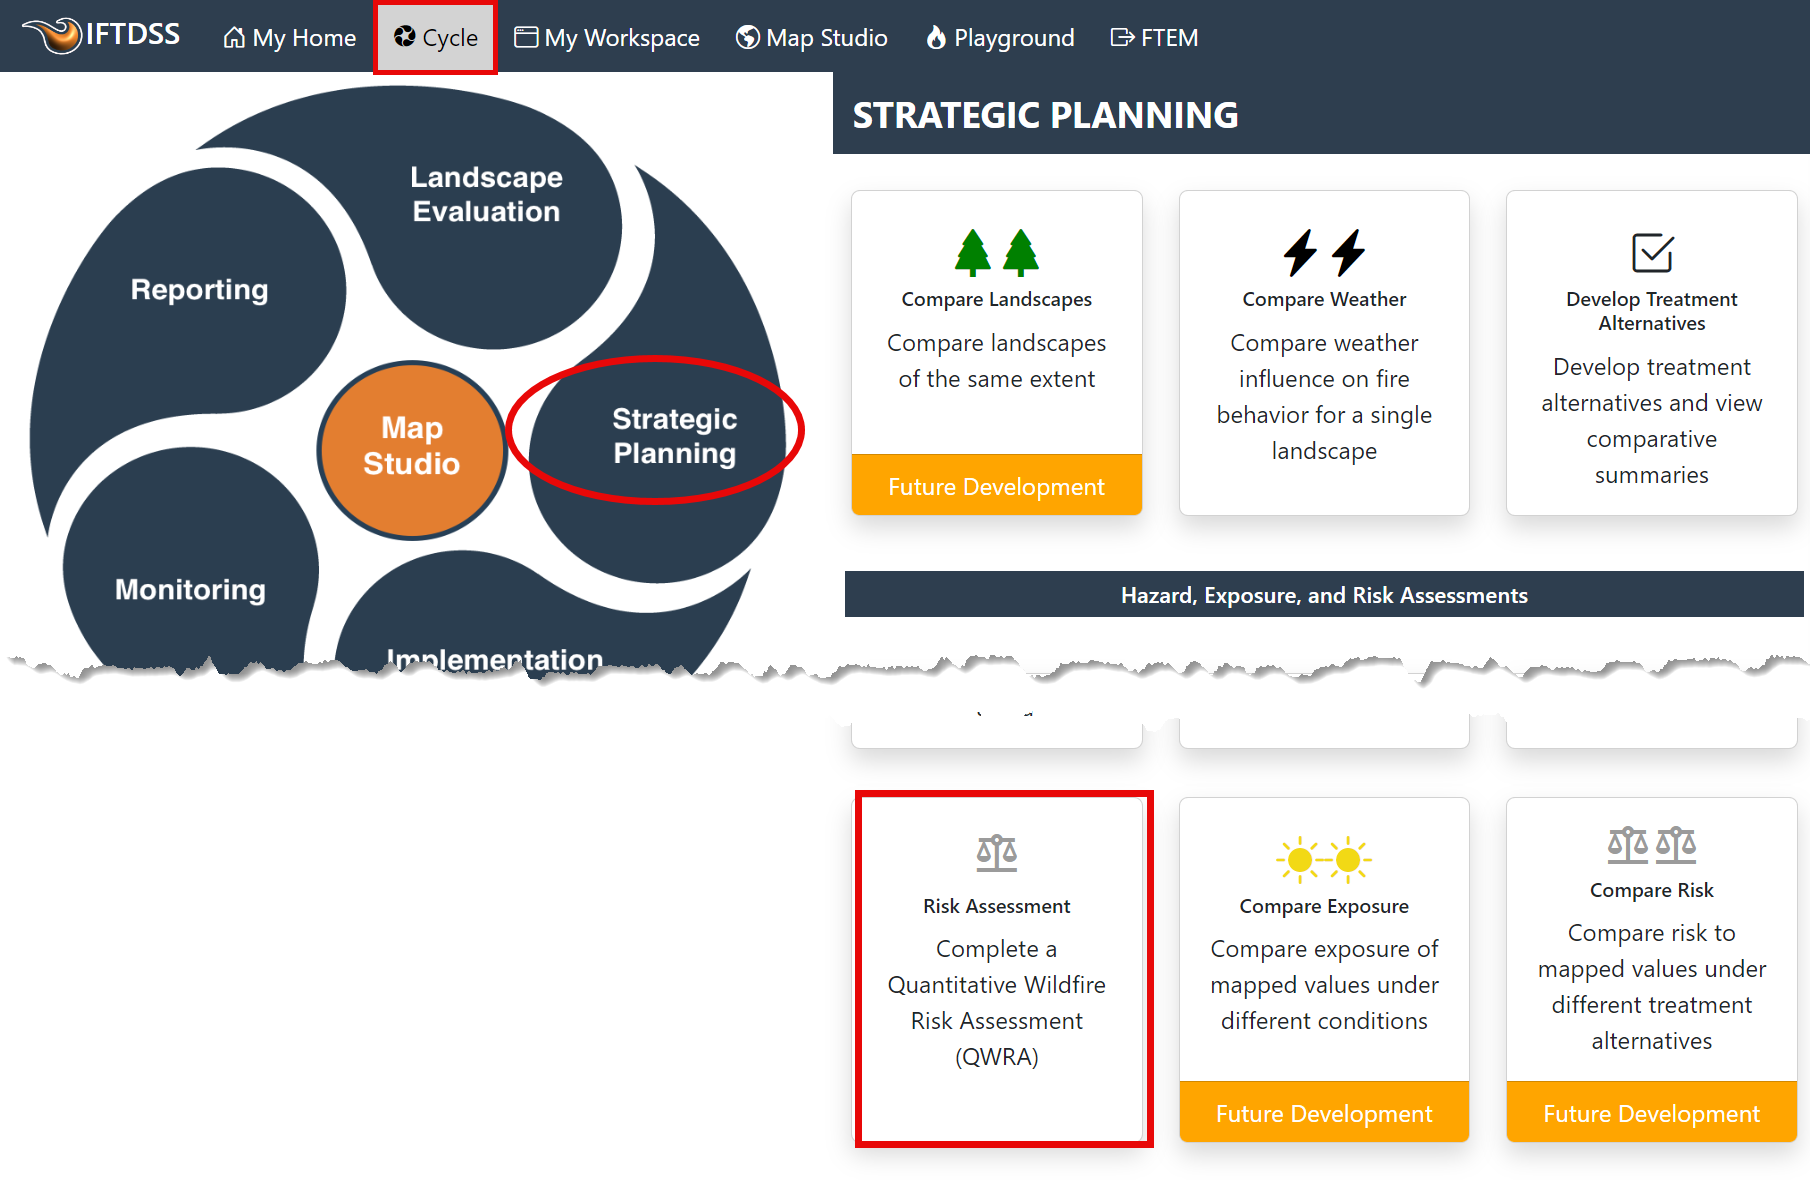 Risk Assessment is under the Strategic Planning stage of the IFTDSS Planning Cycle.